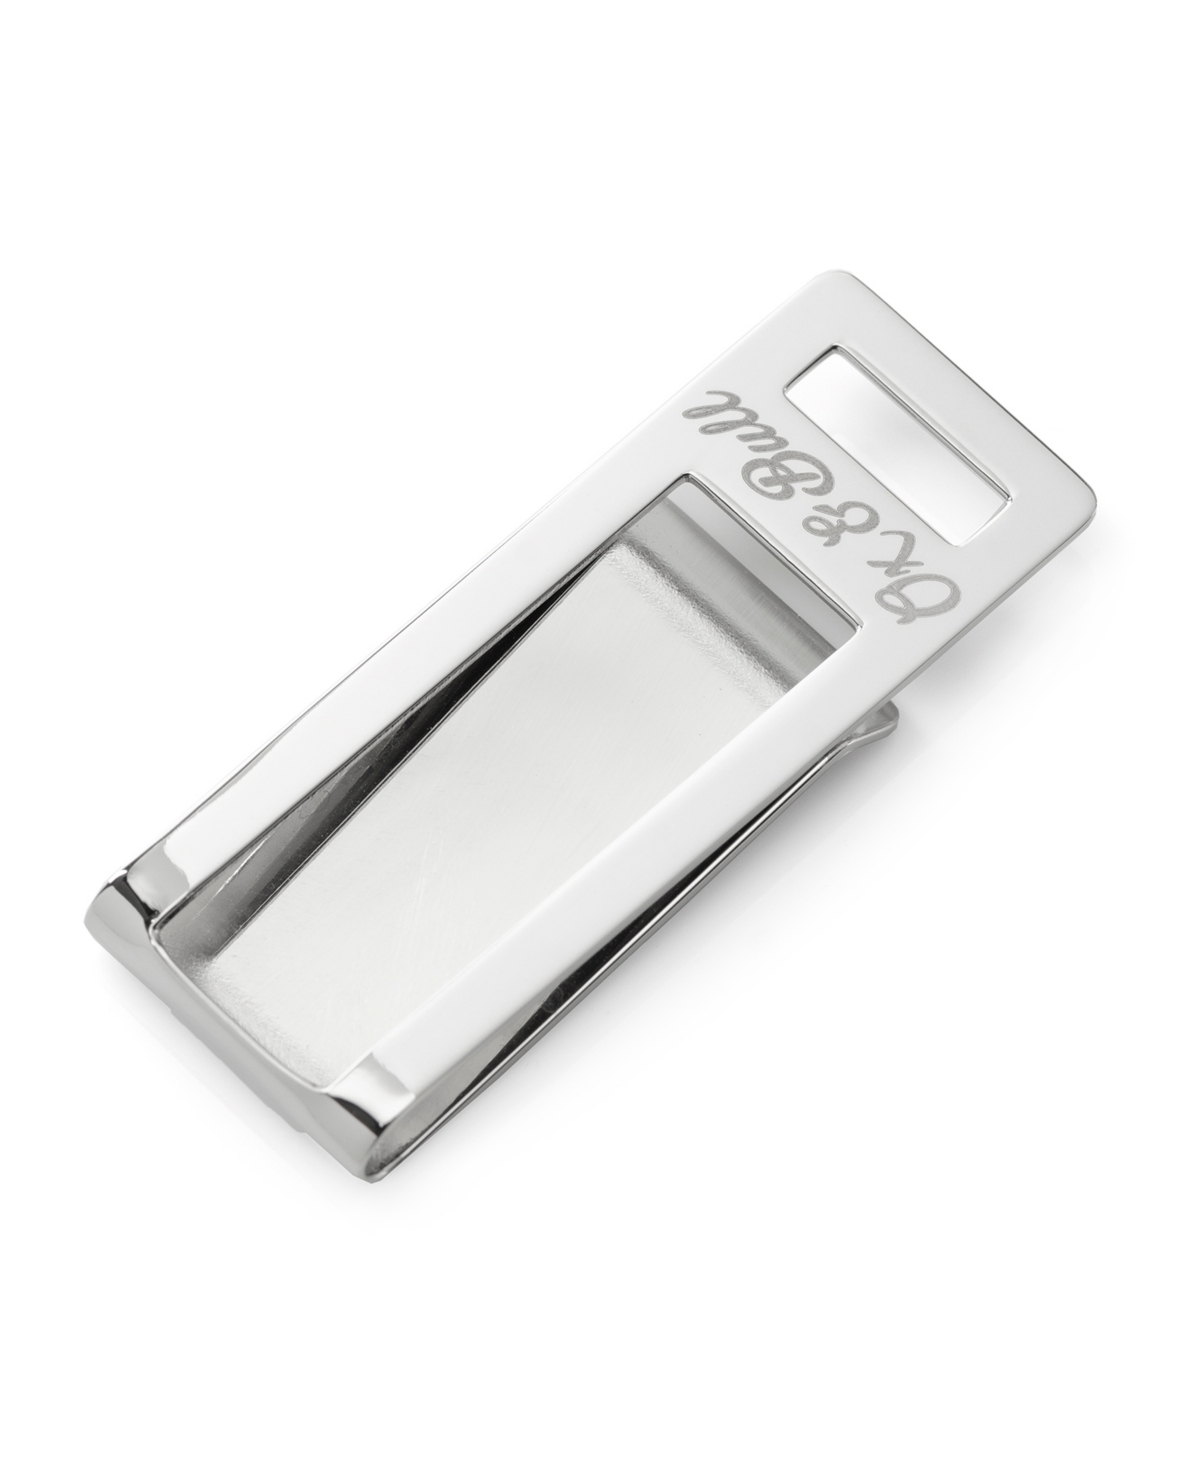 Men's Stainless Steel Cut Out Money Clip - Silver